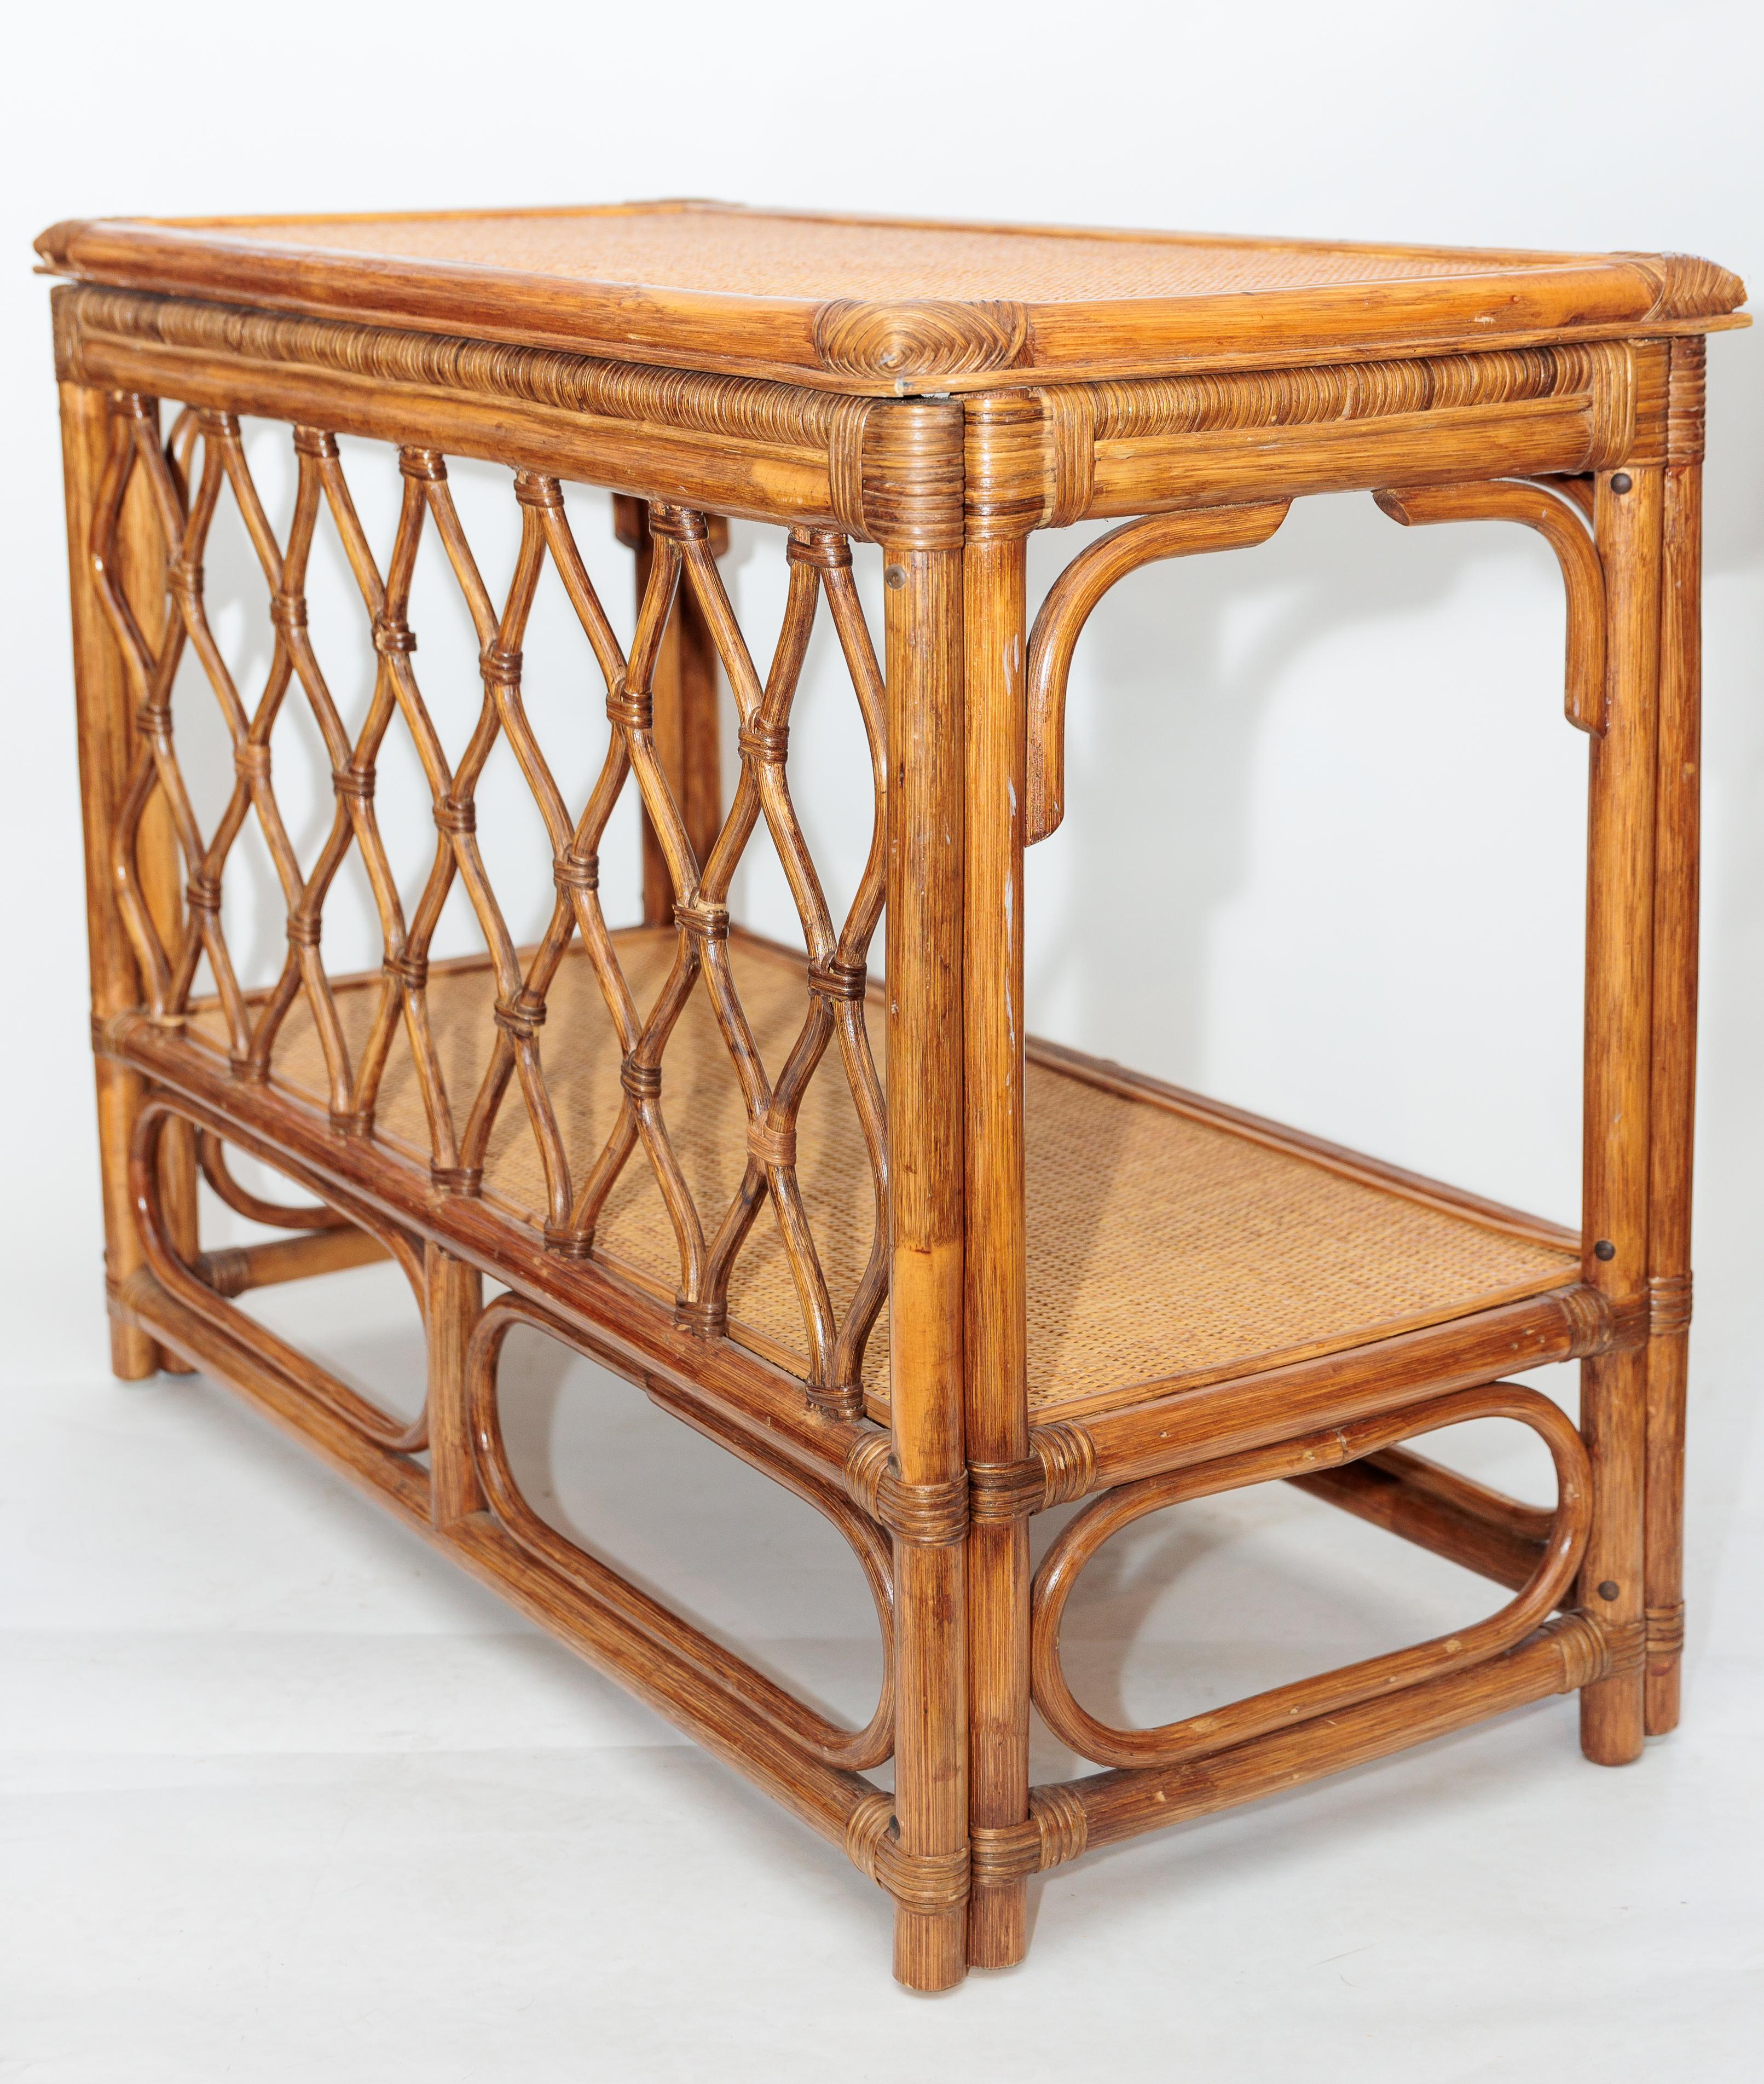 Hand-Crafted Pair of Bamboo and Rattan Tables with Woven Back Detail and Shelf